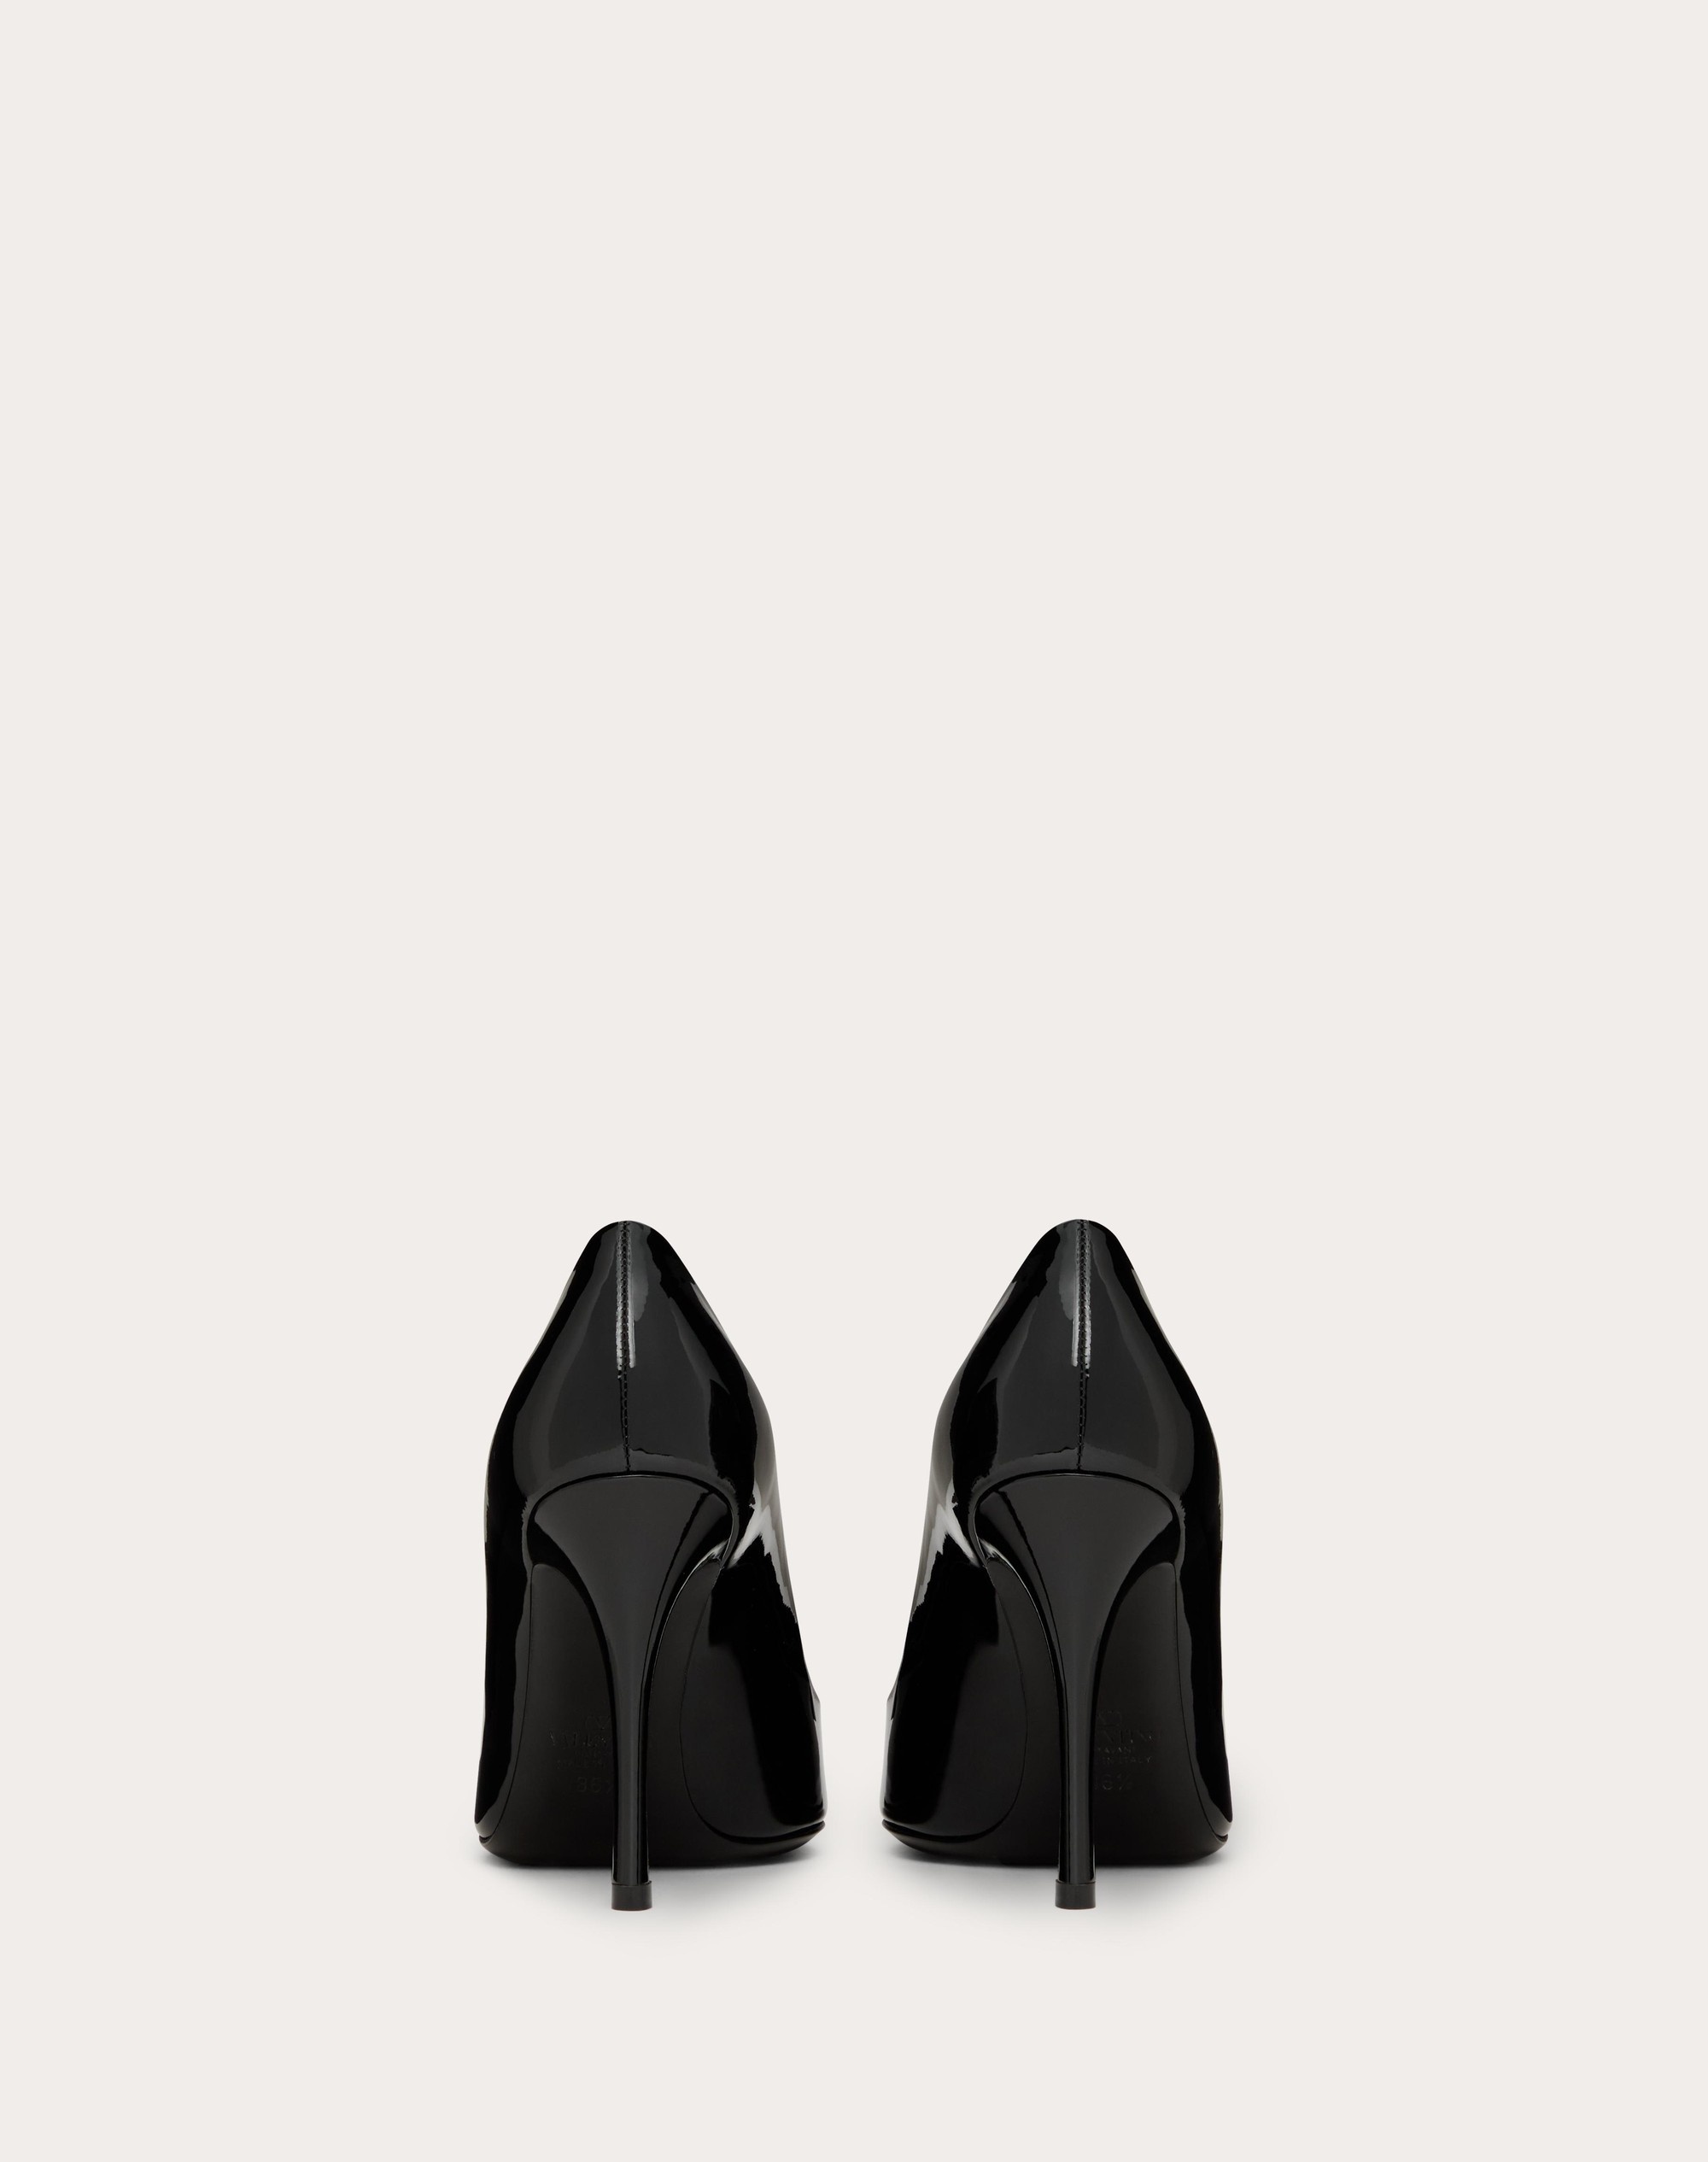 ONE STUD PATENT LEATHER PUMP AND TWO-TONE STUD 100MM - 3